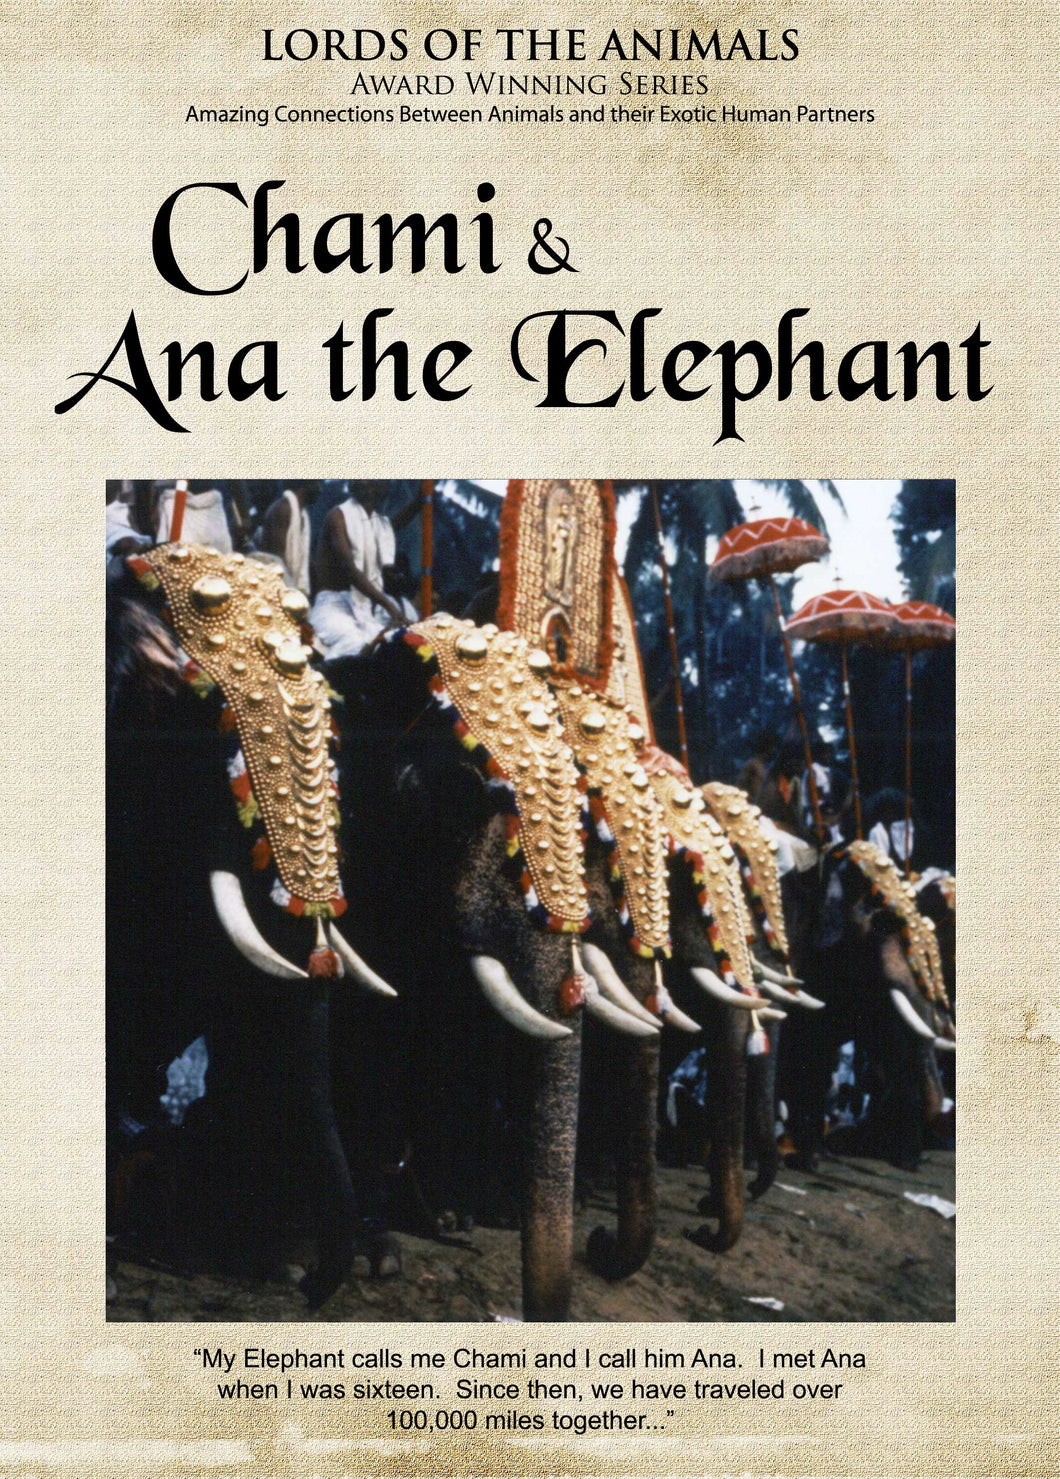 Lords of the Animals: Chami & Ana the Elephant